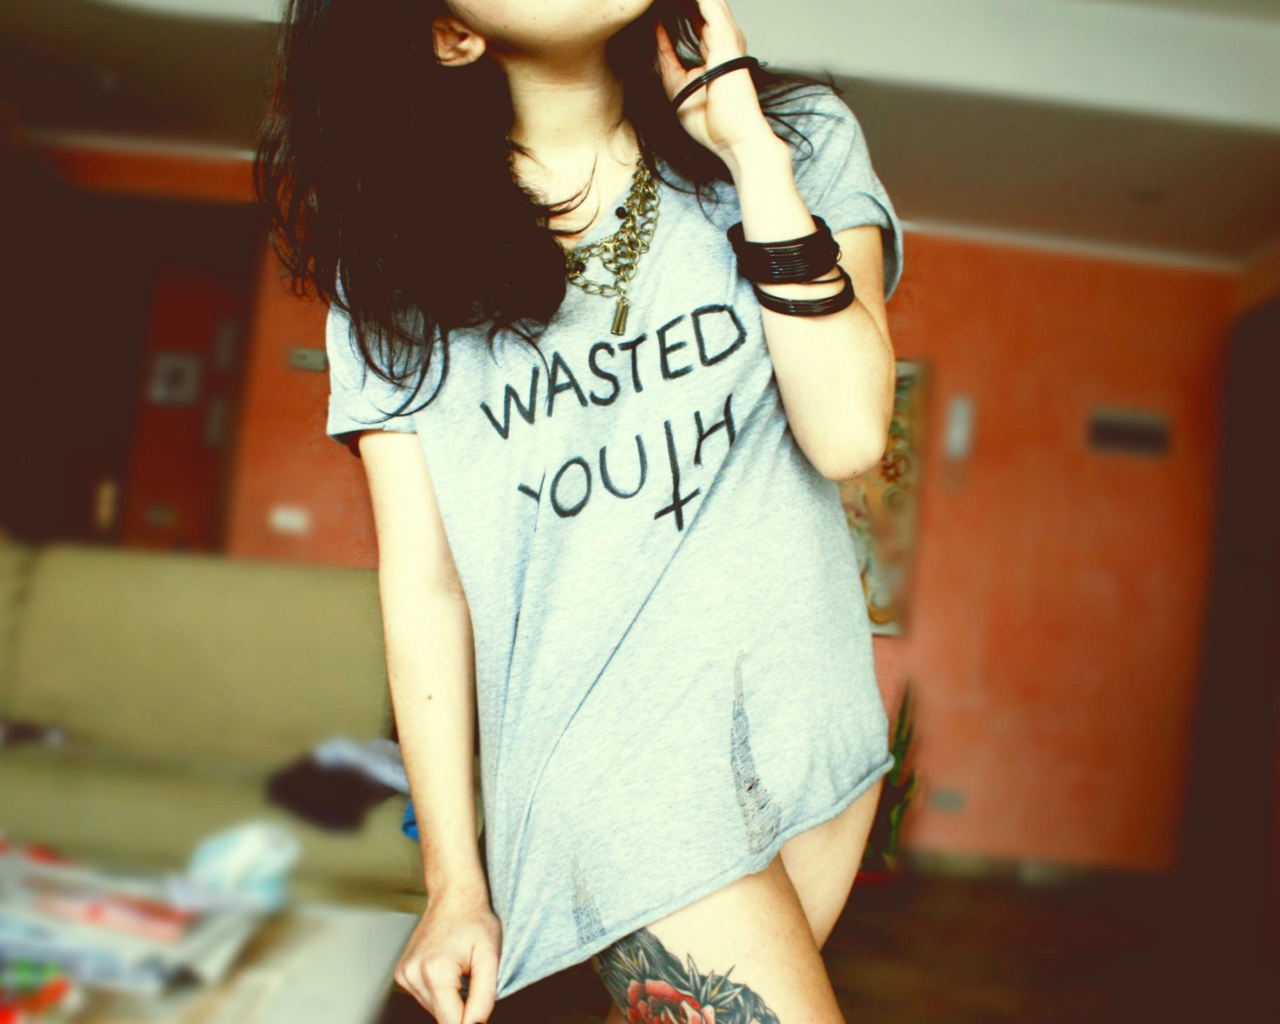 Das Wasted Youth T-Shirt Wallpaper 1280x1024